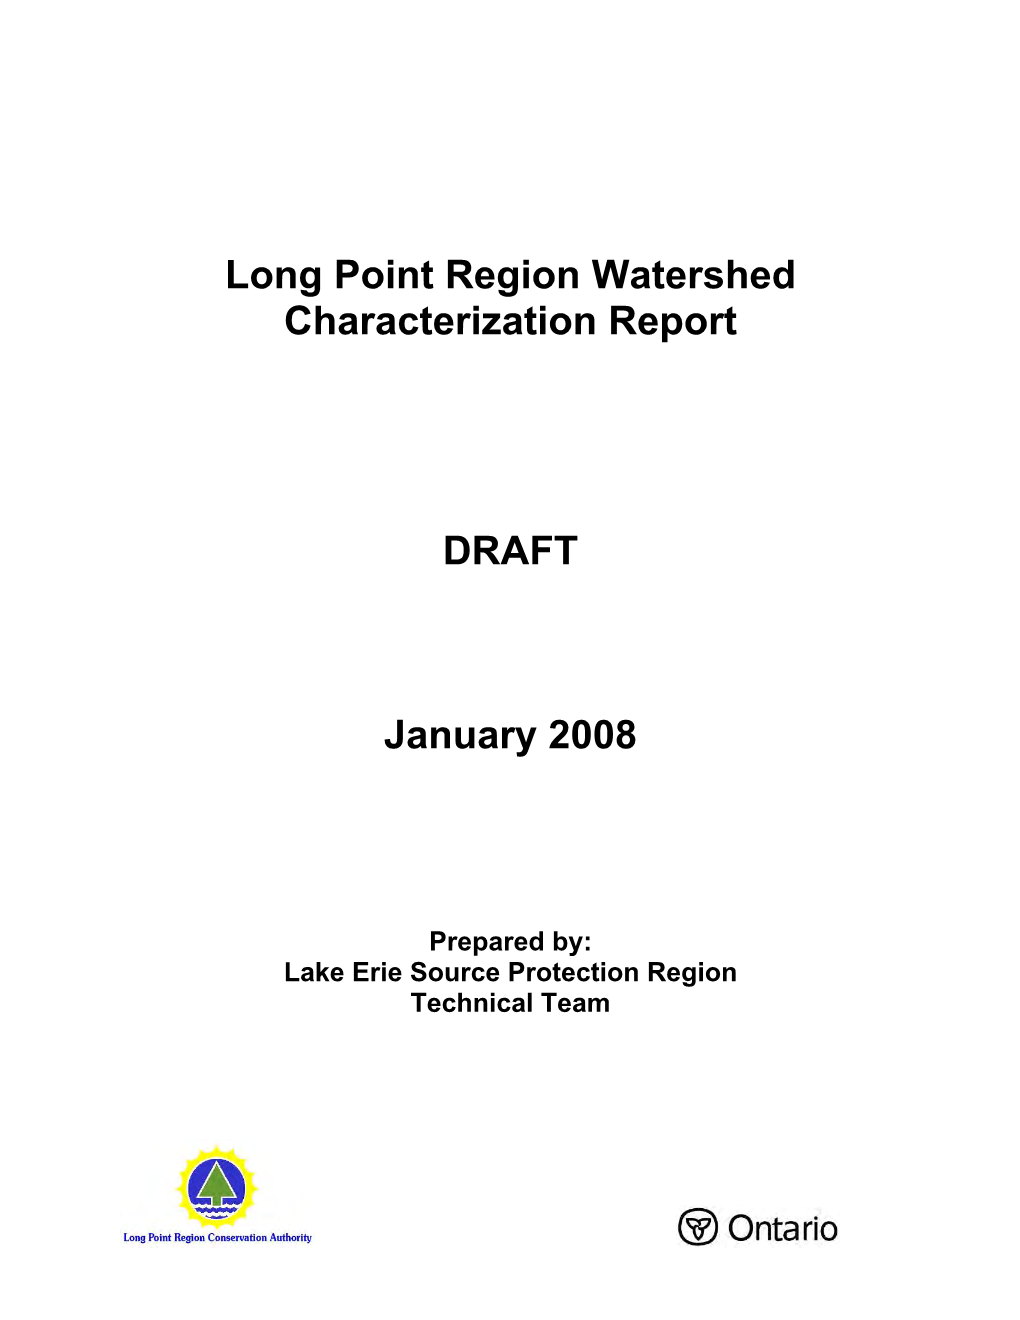 Long Point Region Watershed Characterization Report